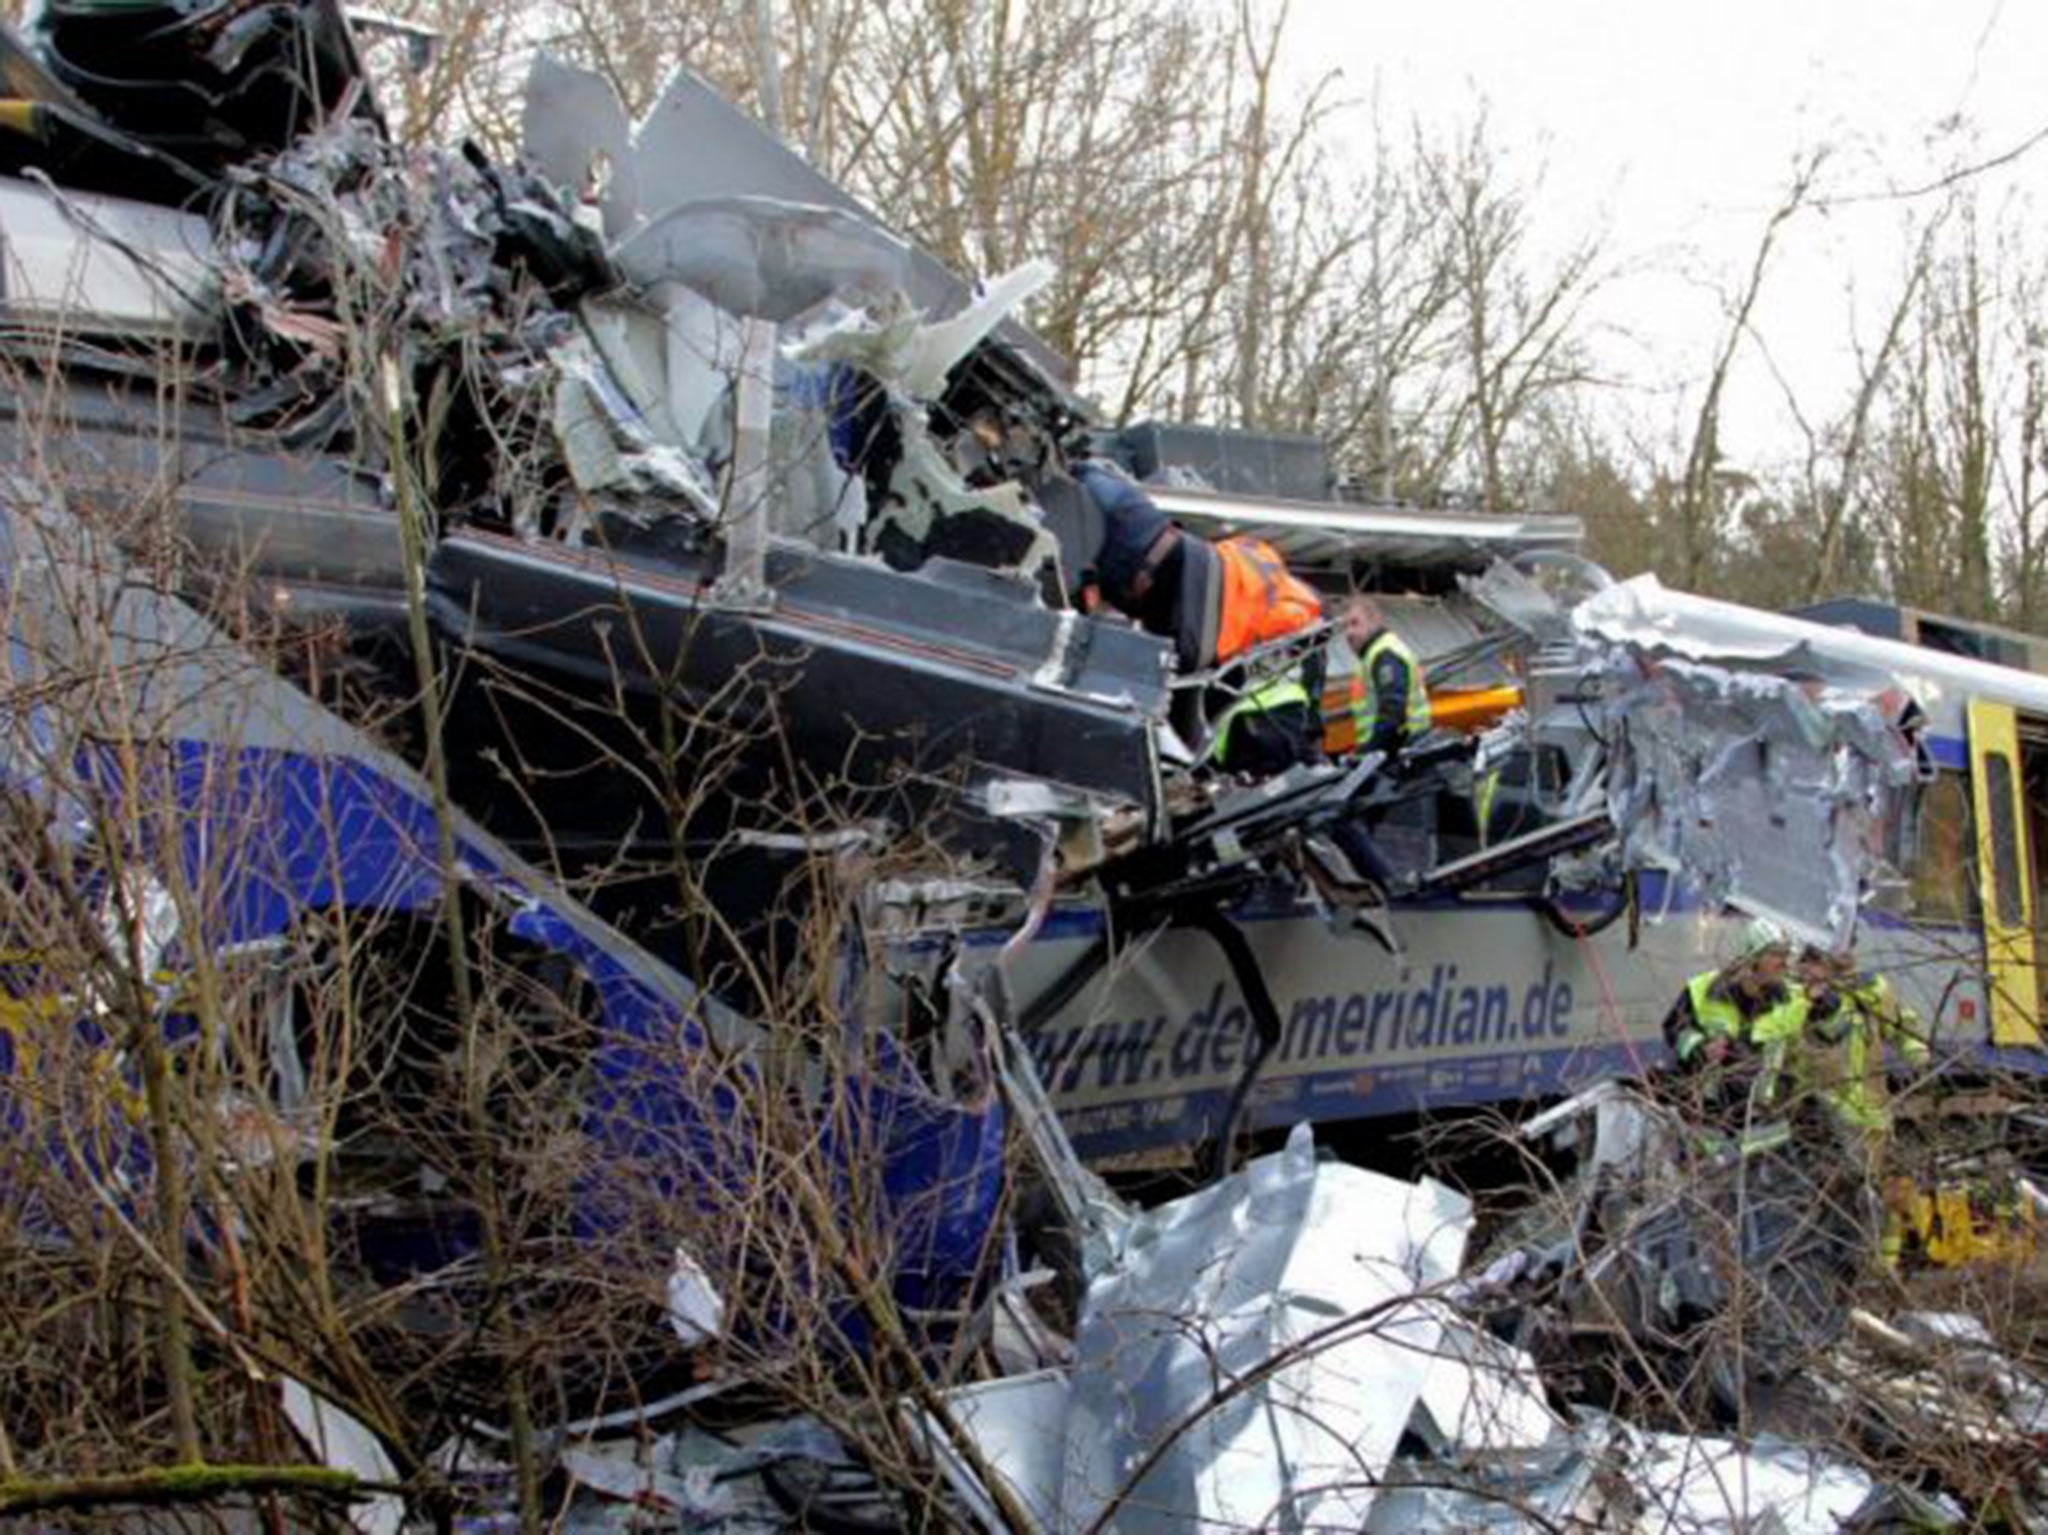 Rescue workers at the scene of the train crash near Bad Aibling